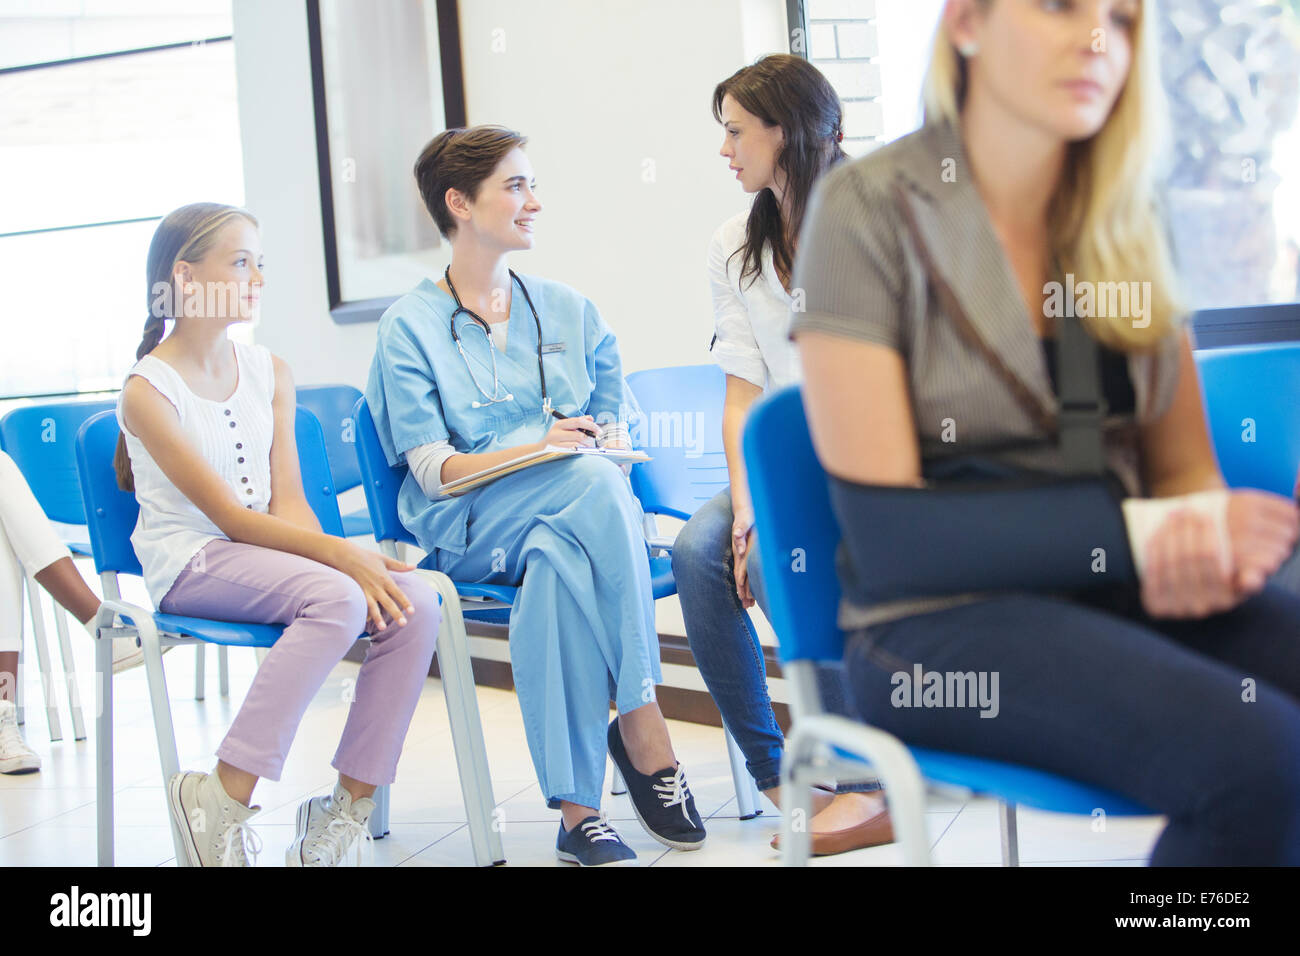 Nurse and patients talking in hospital Stock Photo